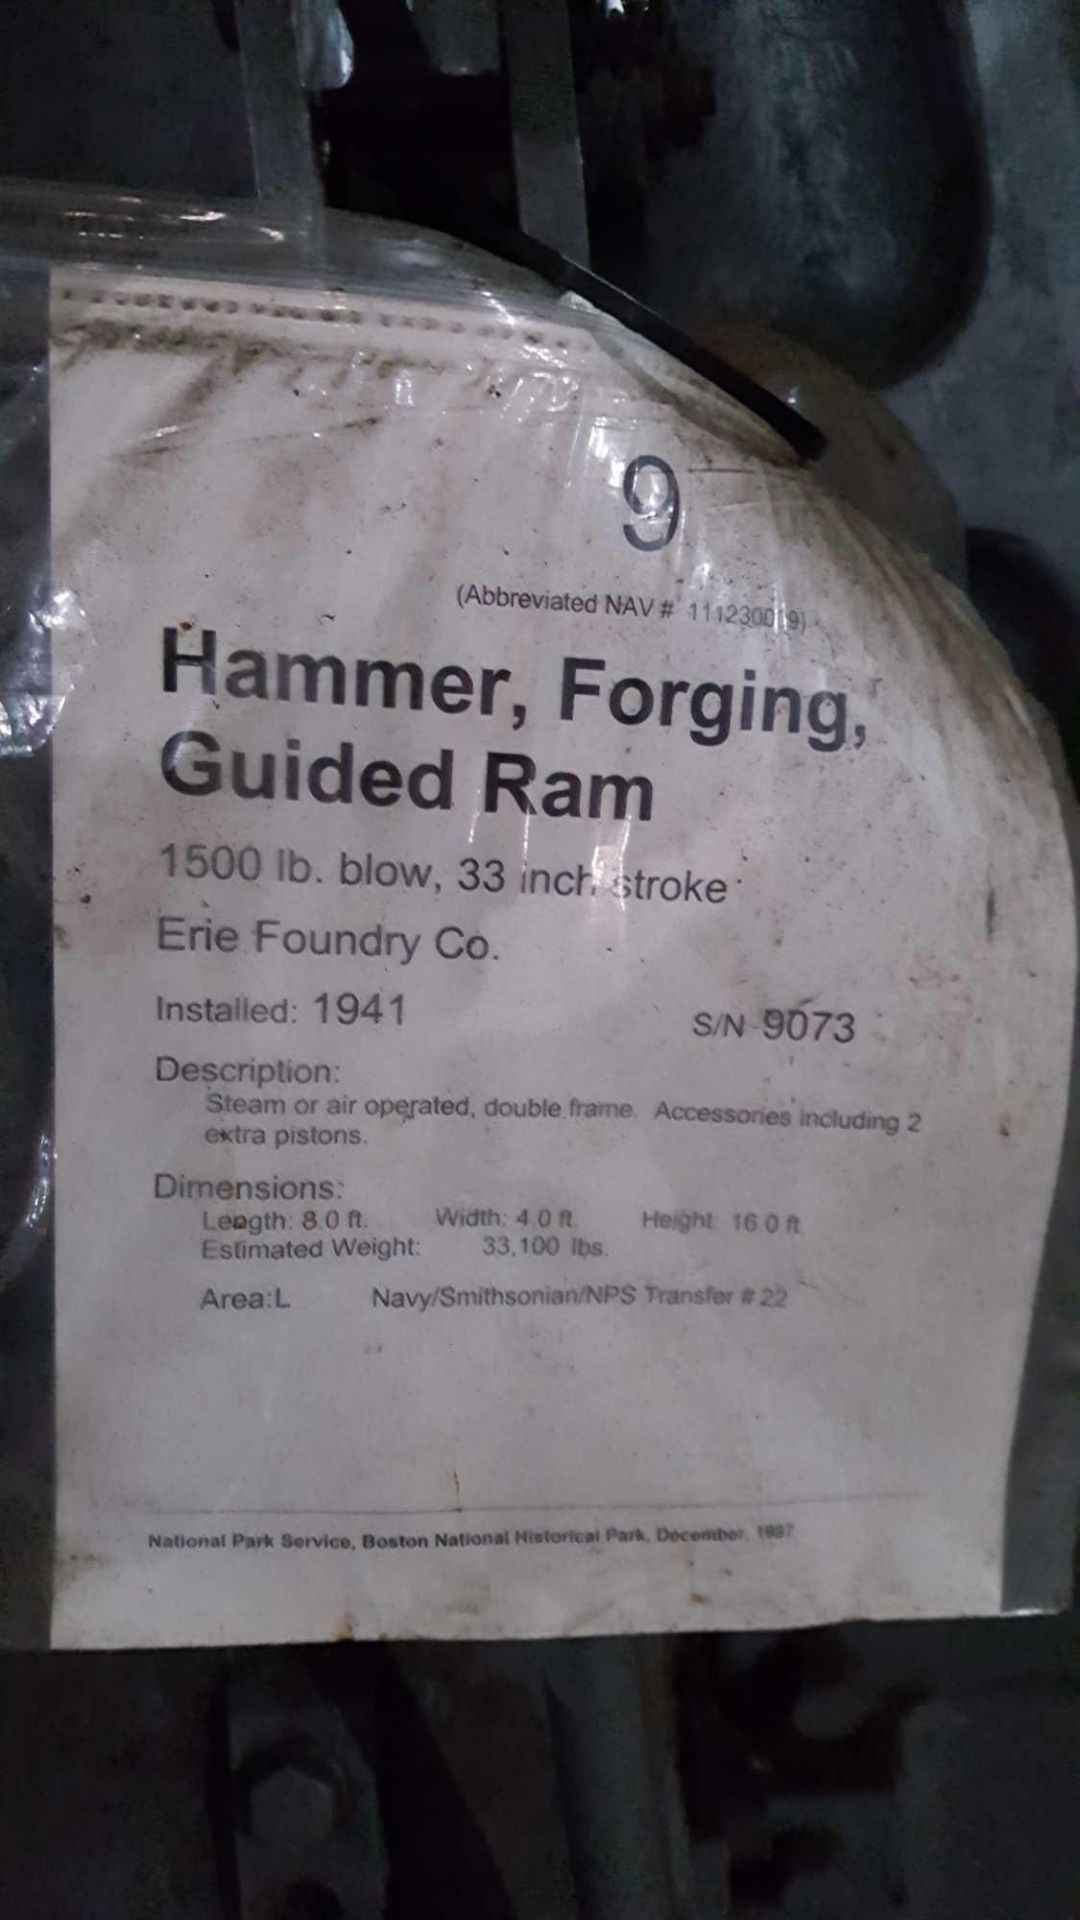 Erie Foundry Company Hammer, forging, guided Ram, 1500 lb blow, 33 inch stroke, serial number 9 - Image 5 of 5